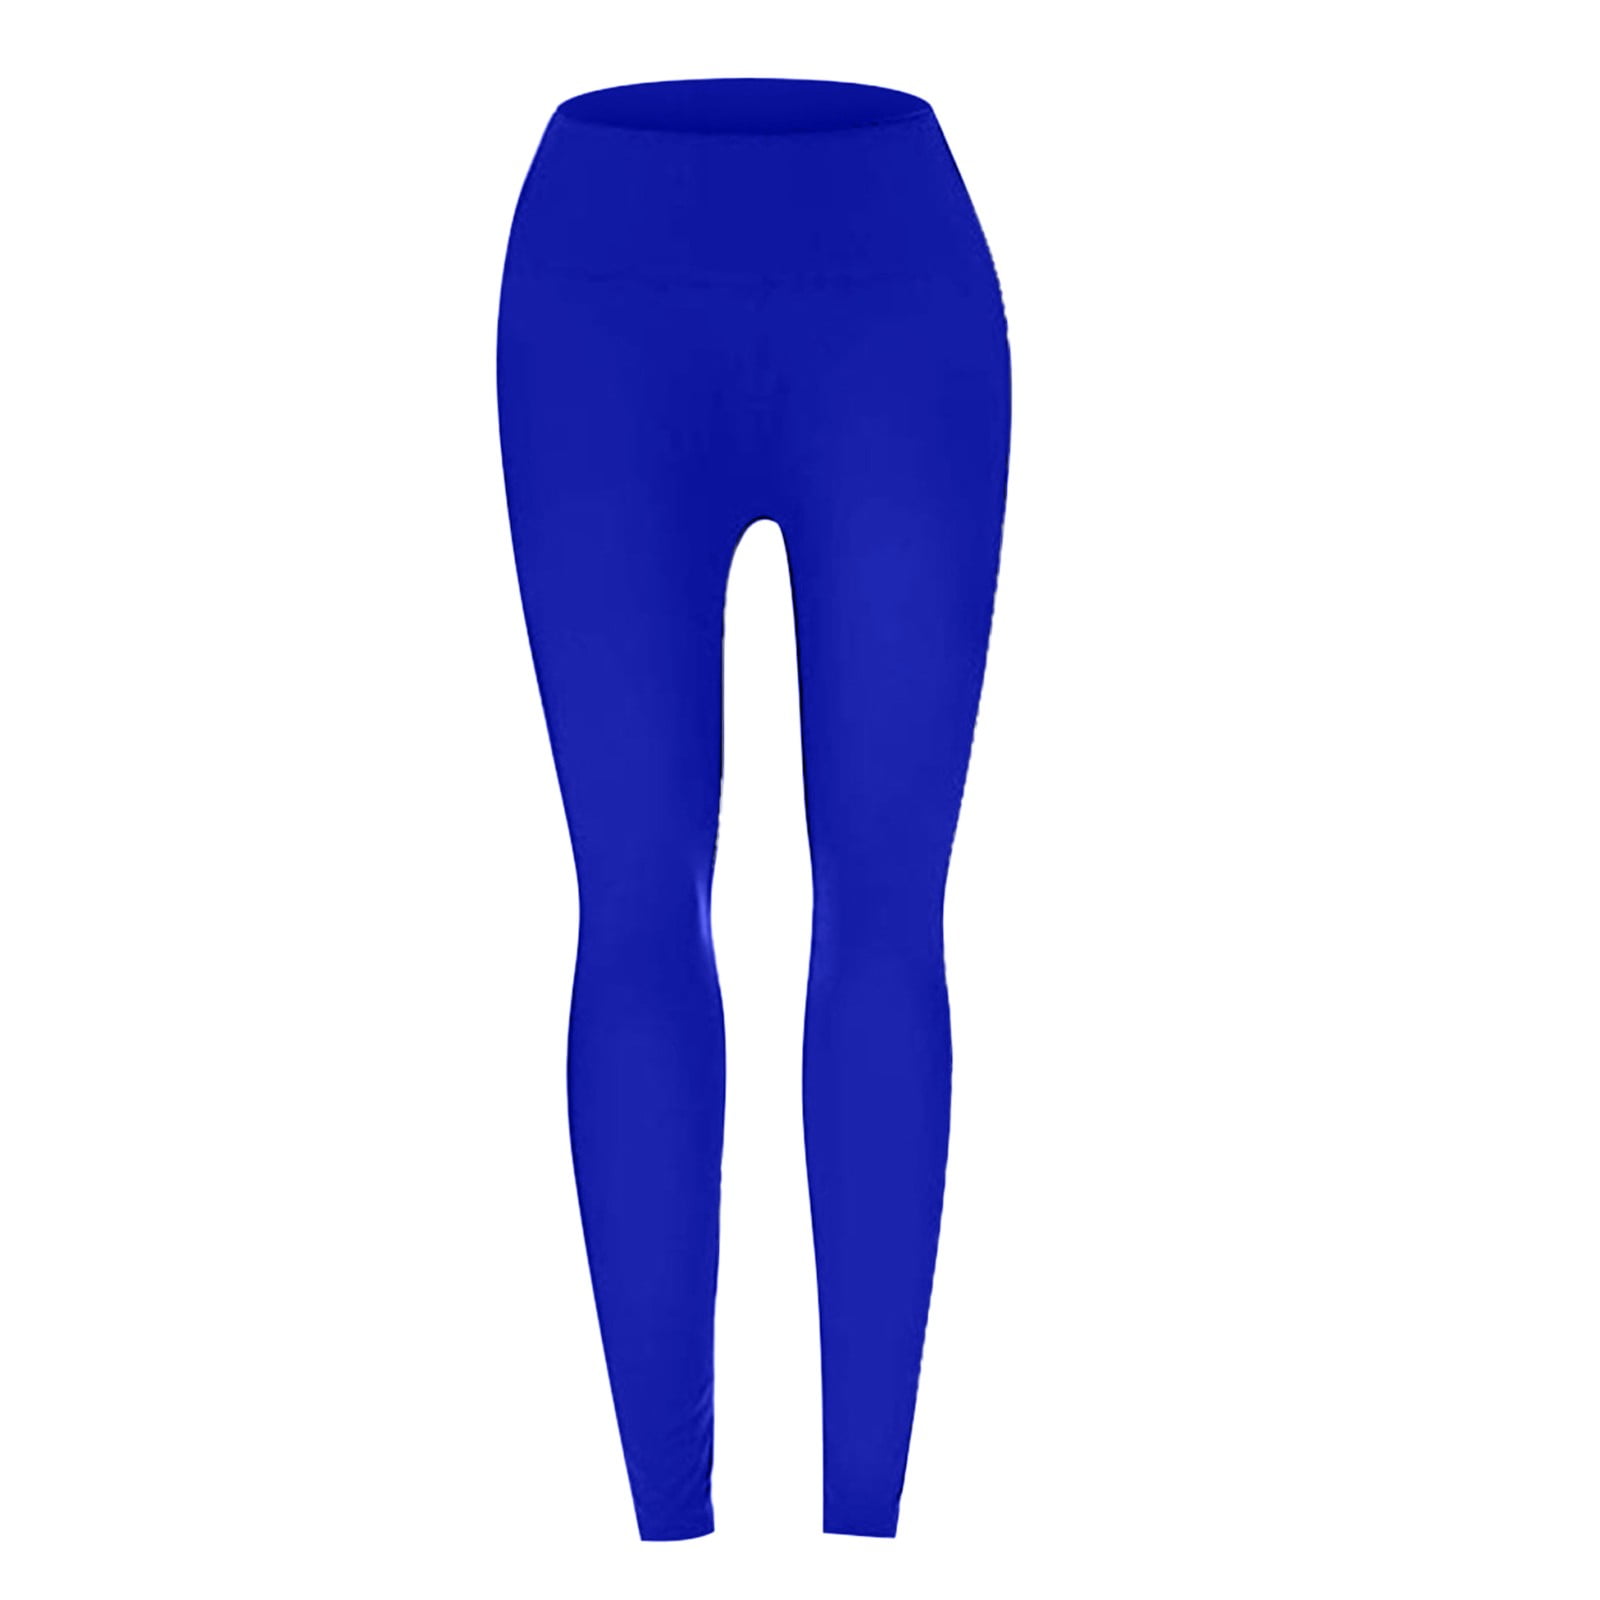 Ultra Low Rise Blue Leggings Leggings for Women Cotton Super Low Rise Yoga  Workout Fitness Full Length Made in USA -  Ireland